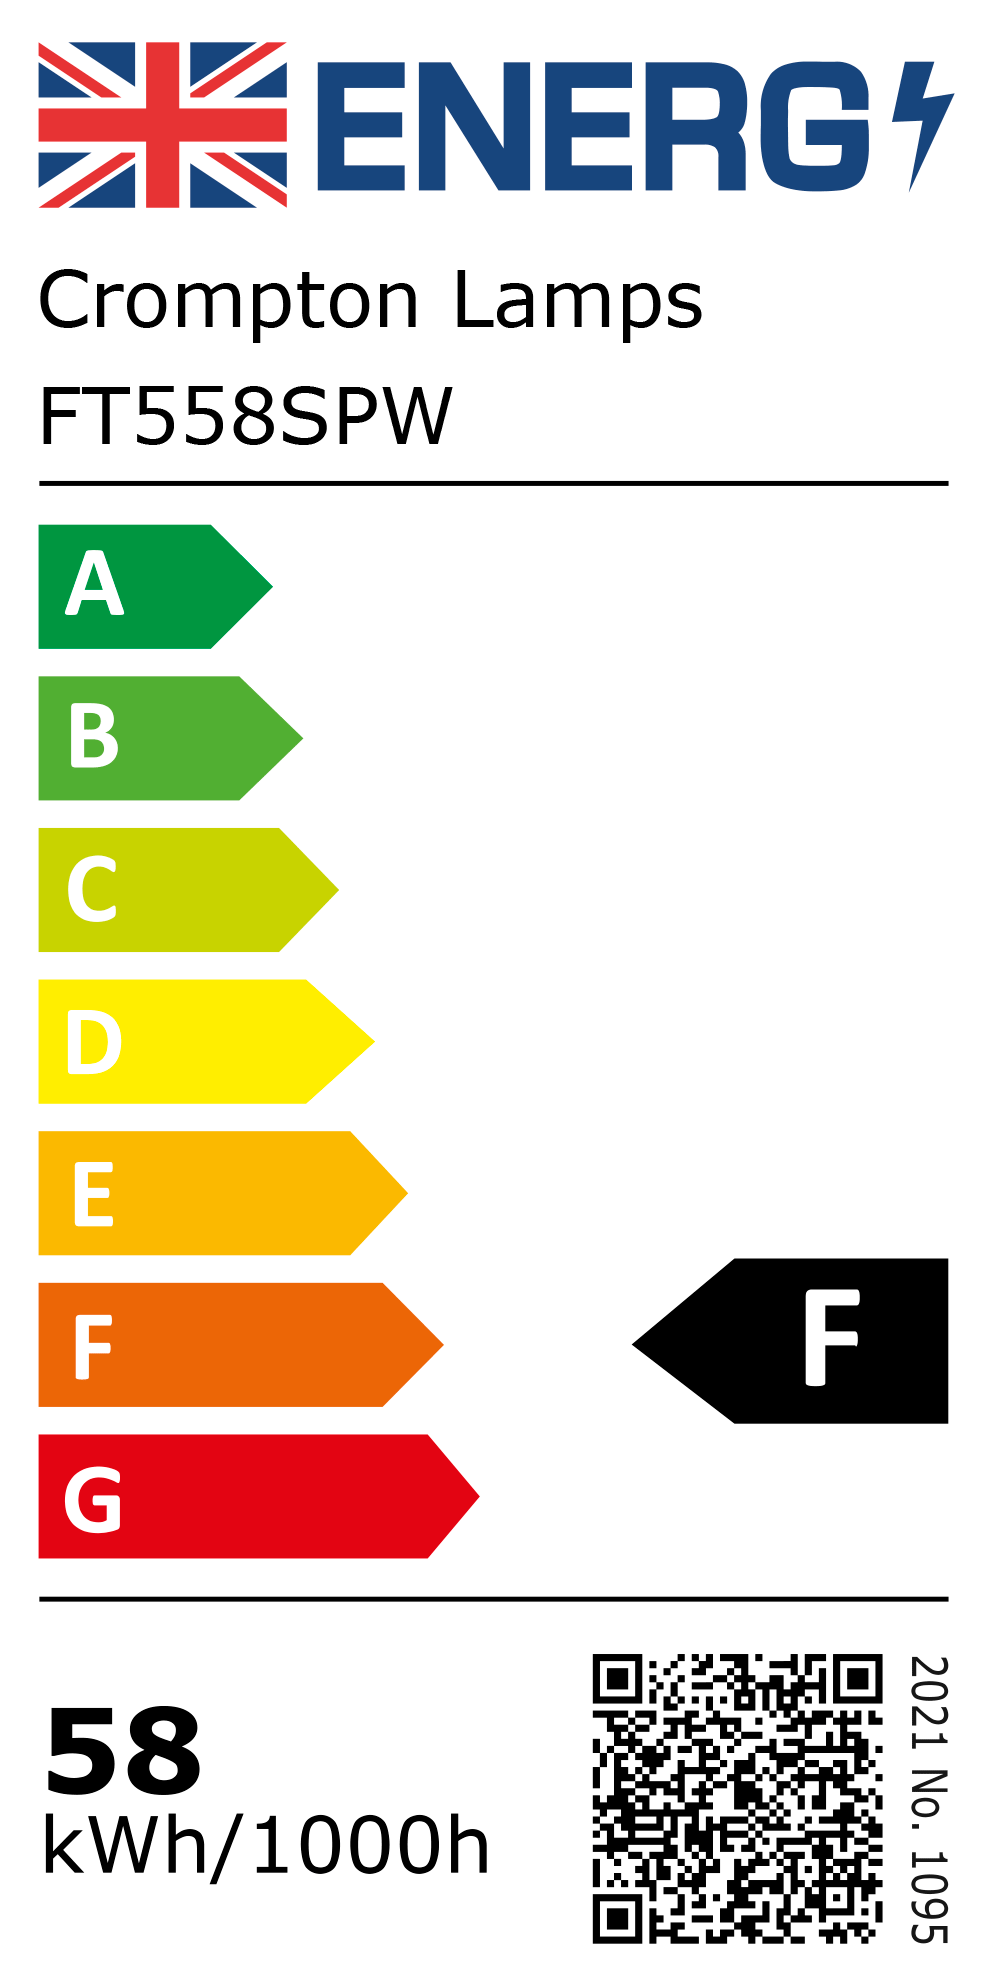 New 2021 Energy Rating Label: MPN FT558SPW